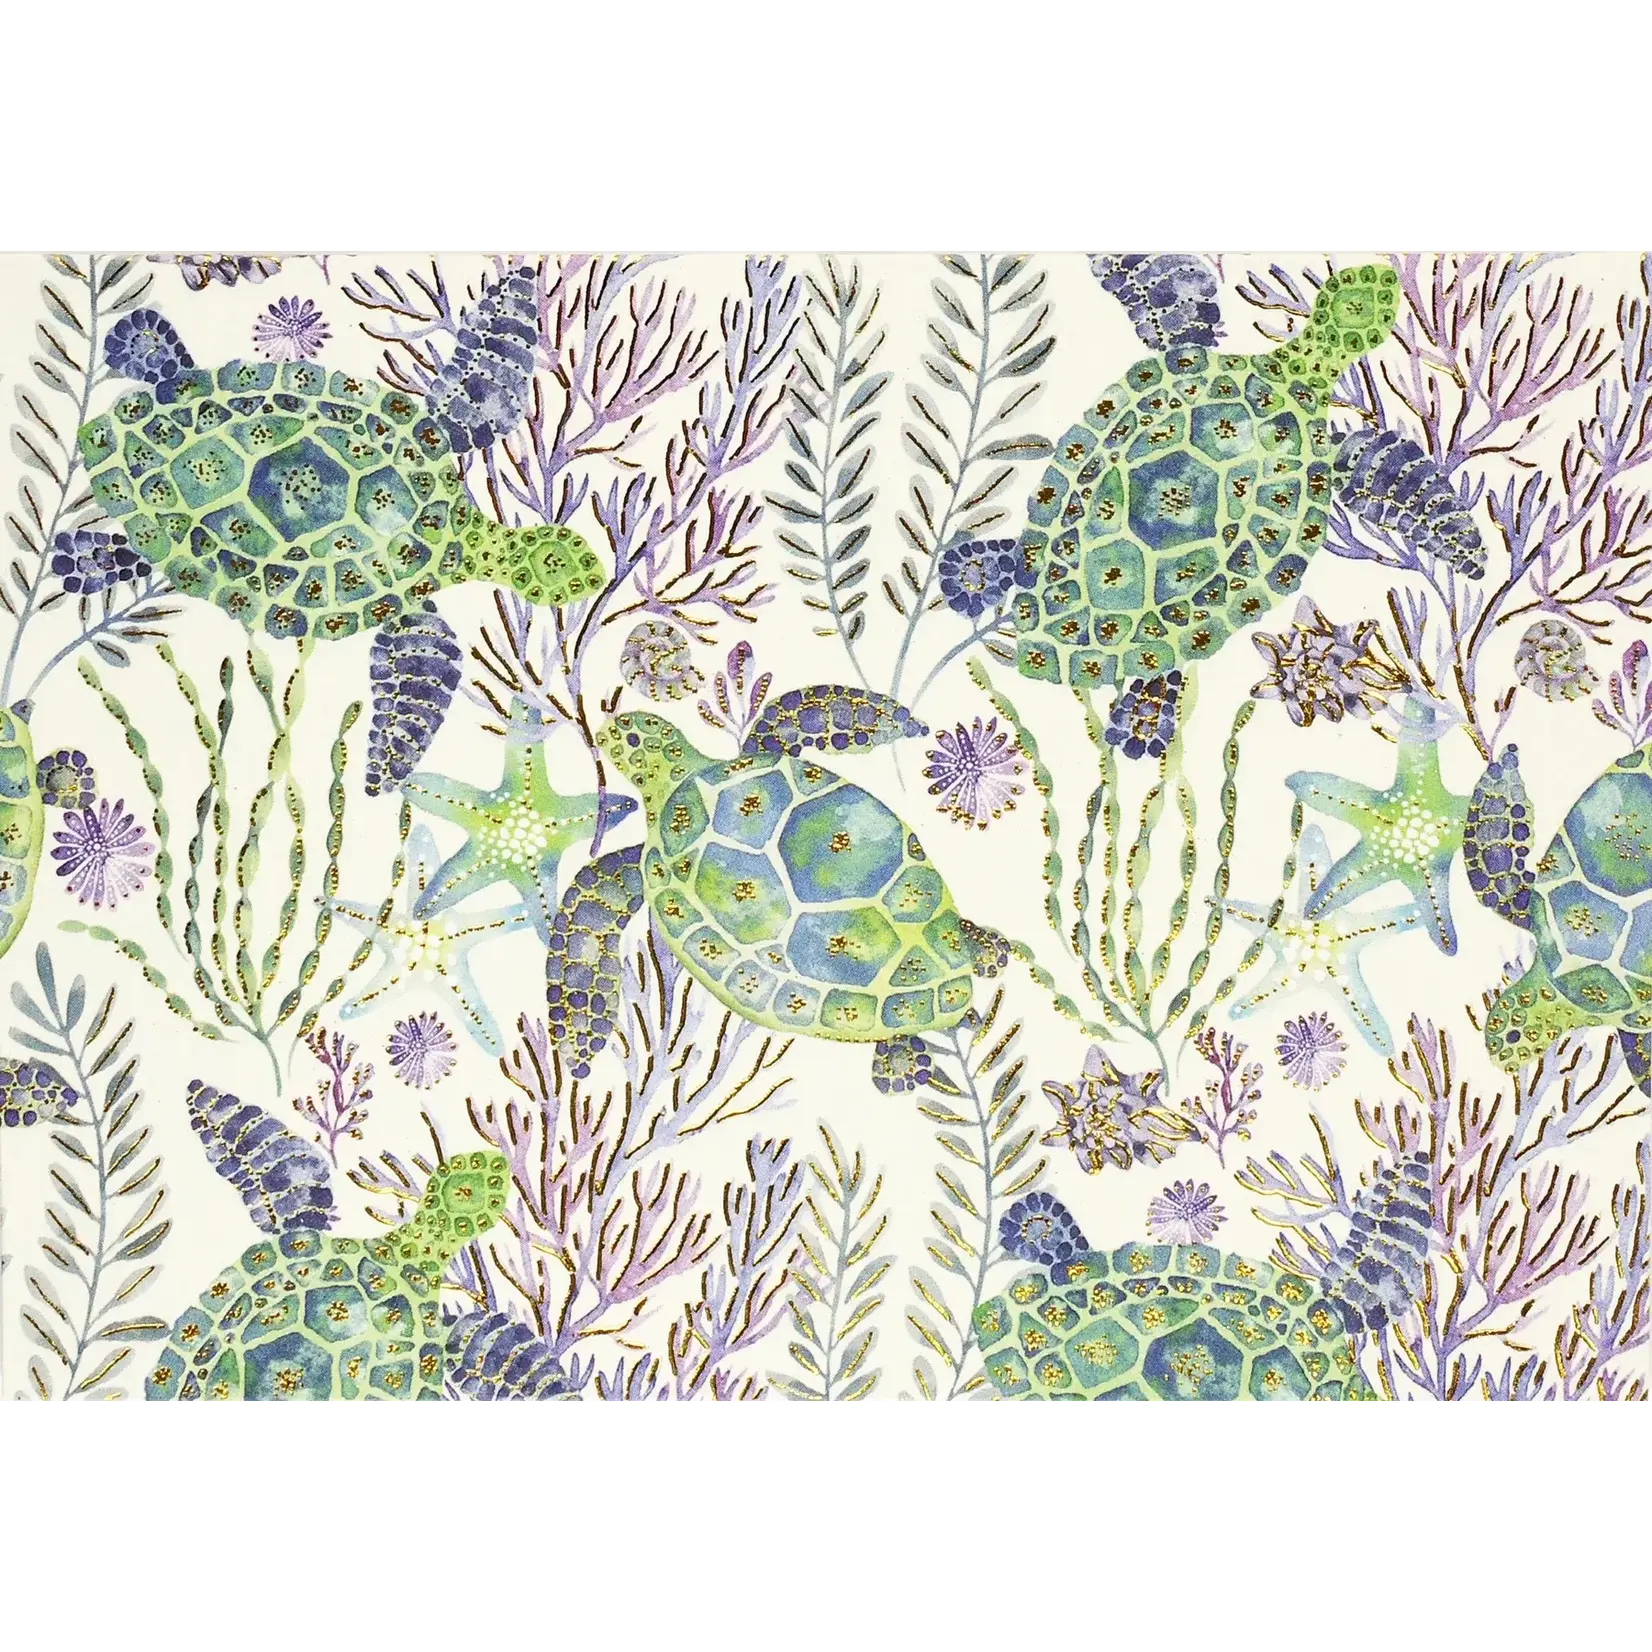 Peter Pauper Press Sea Turtles Boxed Note Cards